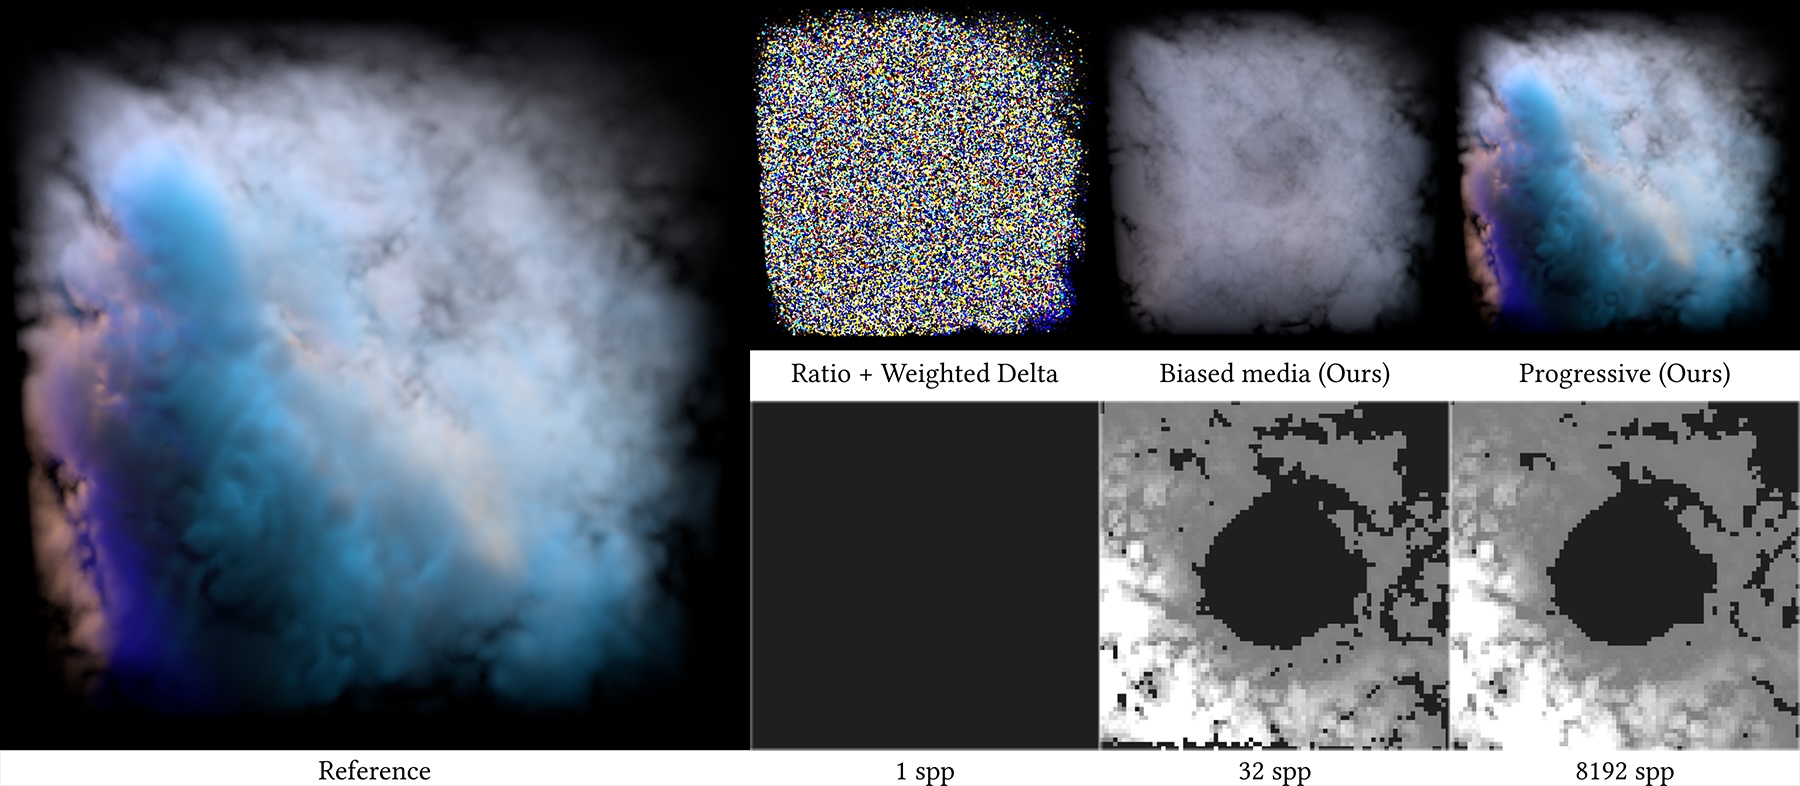 Figure 1 from the paper: Most existing unbiased null-scattering methods for heterogeneous participating media require knowledge of a maximum density (majorant) to perform well. Unfortunately, bounding majorants are difficult to guarantee in production, and existing methods like ratio tracking and weighted delta tracking (top, left) suffer from extreme variance if the “majorant” (𝜇𝑡 =0.01) significantly underestimates the maximum density of the medium (𝜇𝑡 ≈3.0). Starting with the same poor estimate for a majorant (𝜇𝑡 = 0.01), we propose to instead clamp the medium density to the chosen majorant. This allows fast, low-variance rendering, but of a modified (biased) medium (top, center). We then show how to progressively update the majorant estimates (bottom row) to rapidly reduce this bias and ensure that the running average (top right) across multiple pixel samples converges to the correct result in the limit.